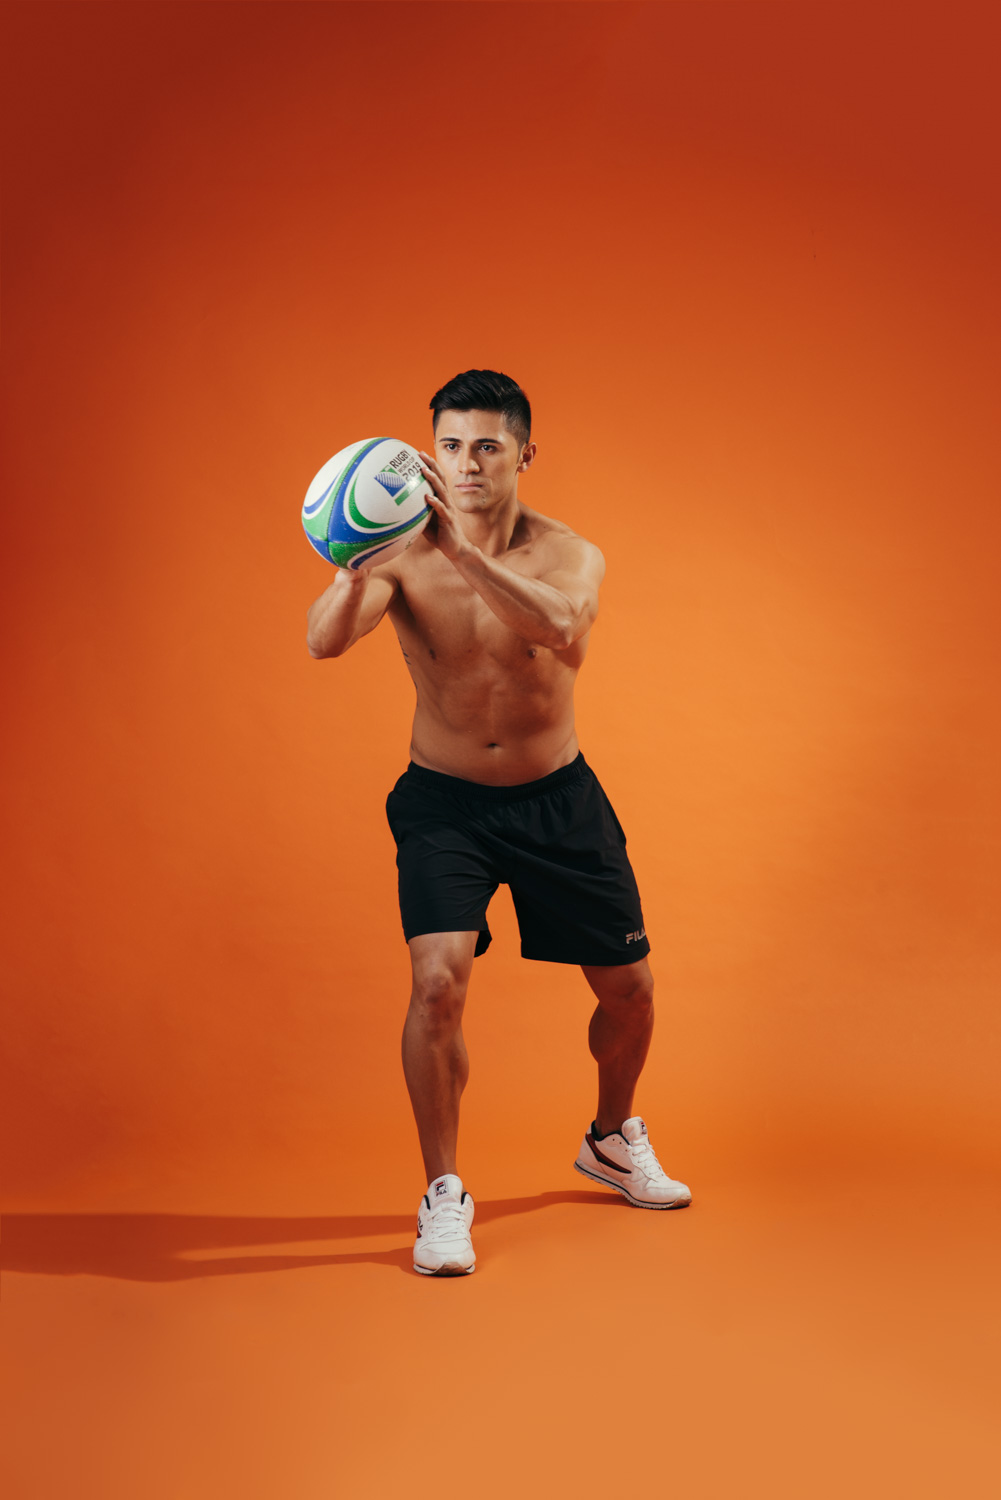 Steven Near is currently a fitness trainer and the director of sports for Manila Flag Football